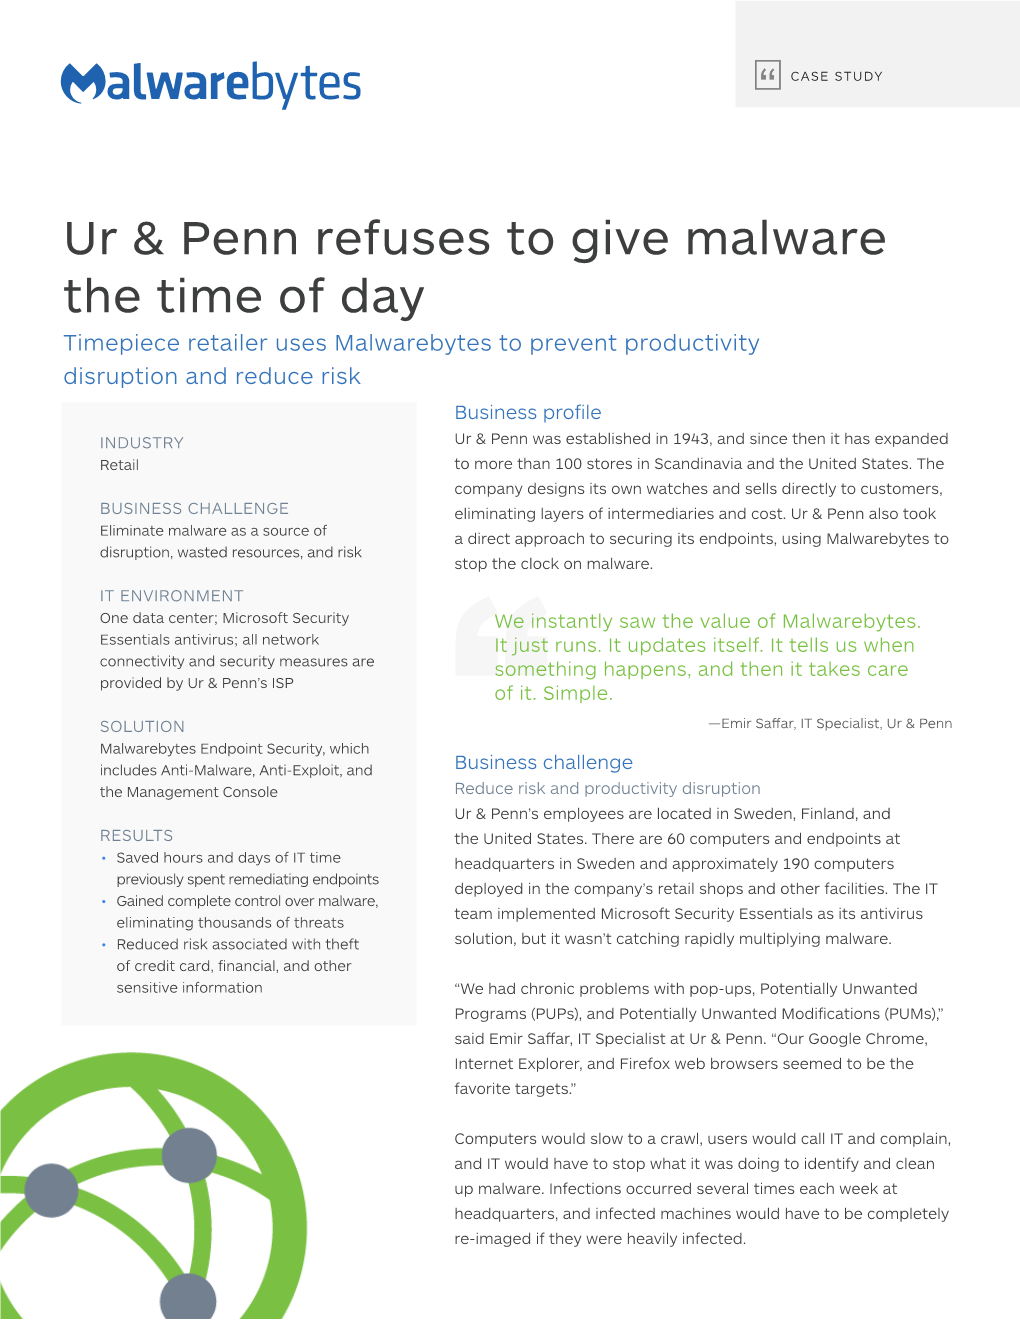 Ur & Penn Refuses to Give Malware the Time Of